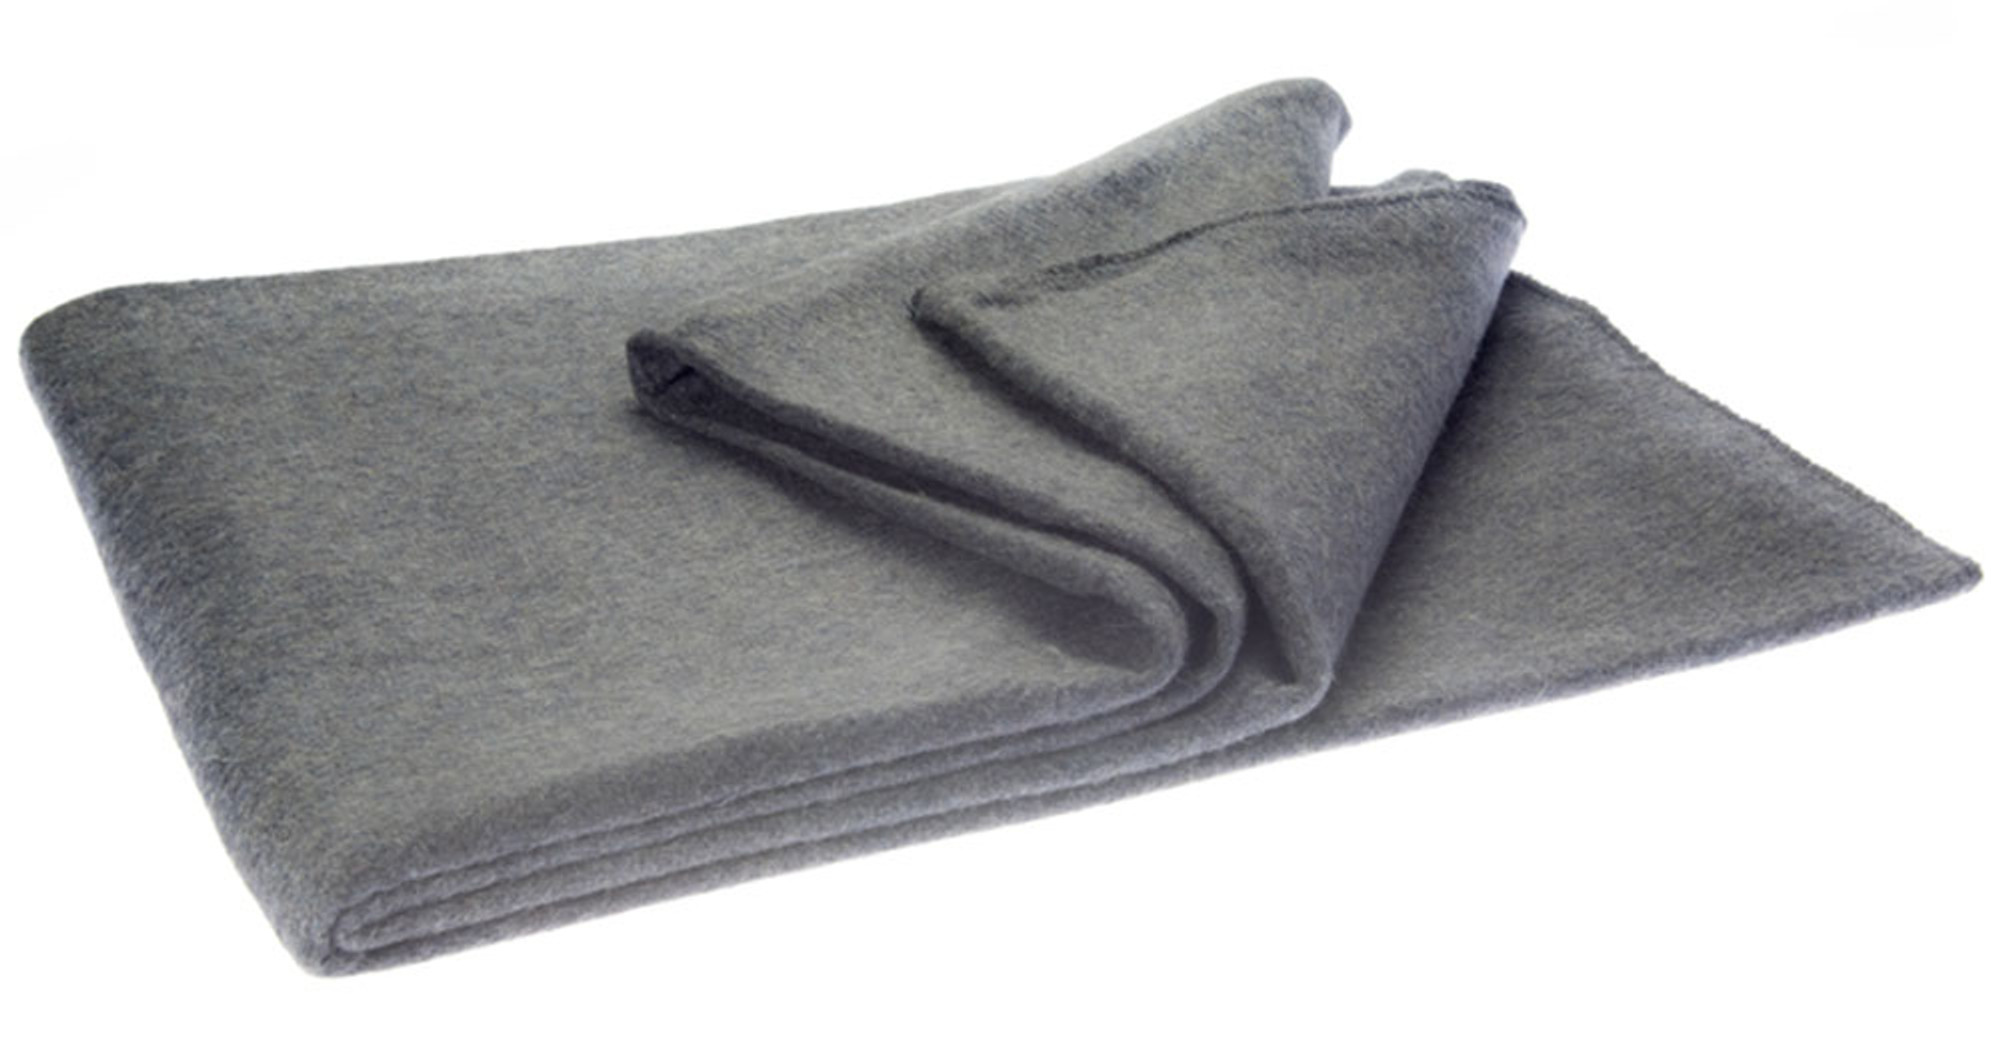 Canadian Armed Forces Issue Grey Wool Blanket